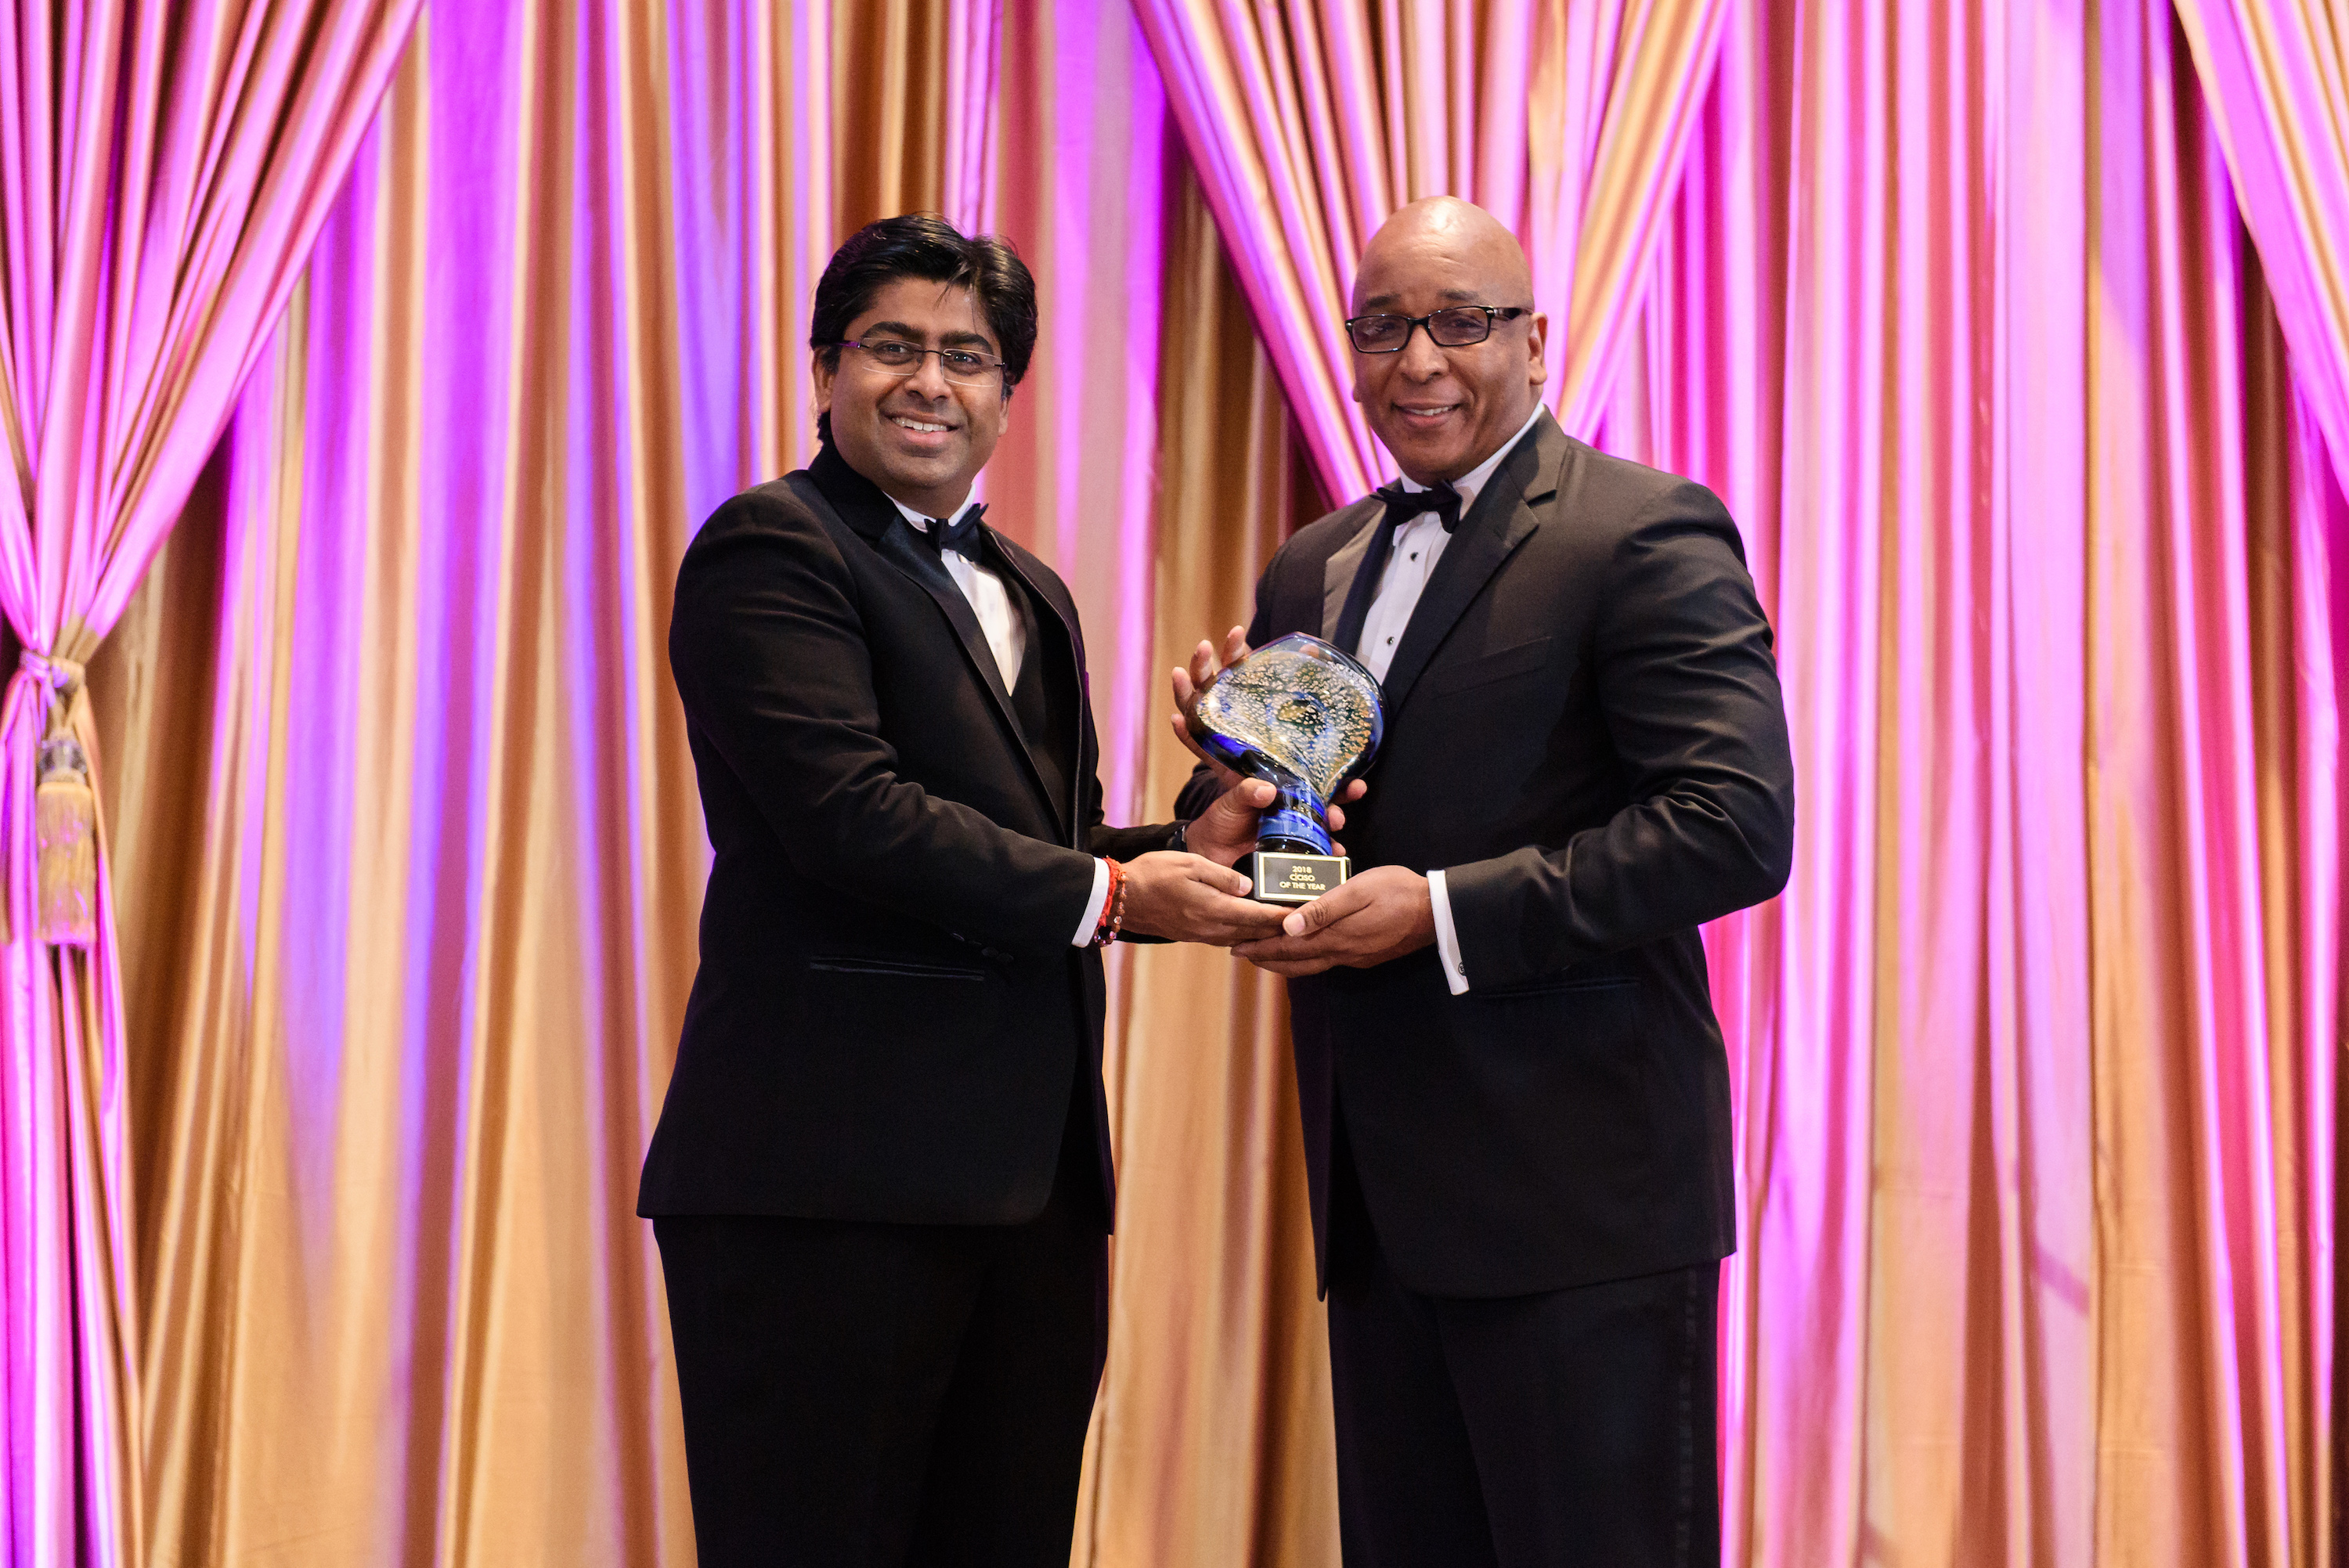 Anthony Dupree, CISO & CIO of Career Builder, accepts his award from Jay Bavisi, CEO, EC-Council Group and Chairman of the Board, EC-Council University